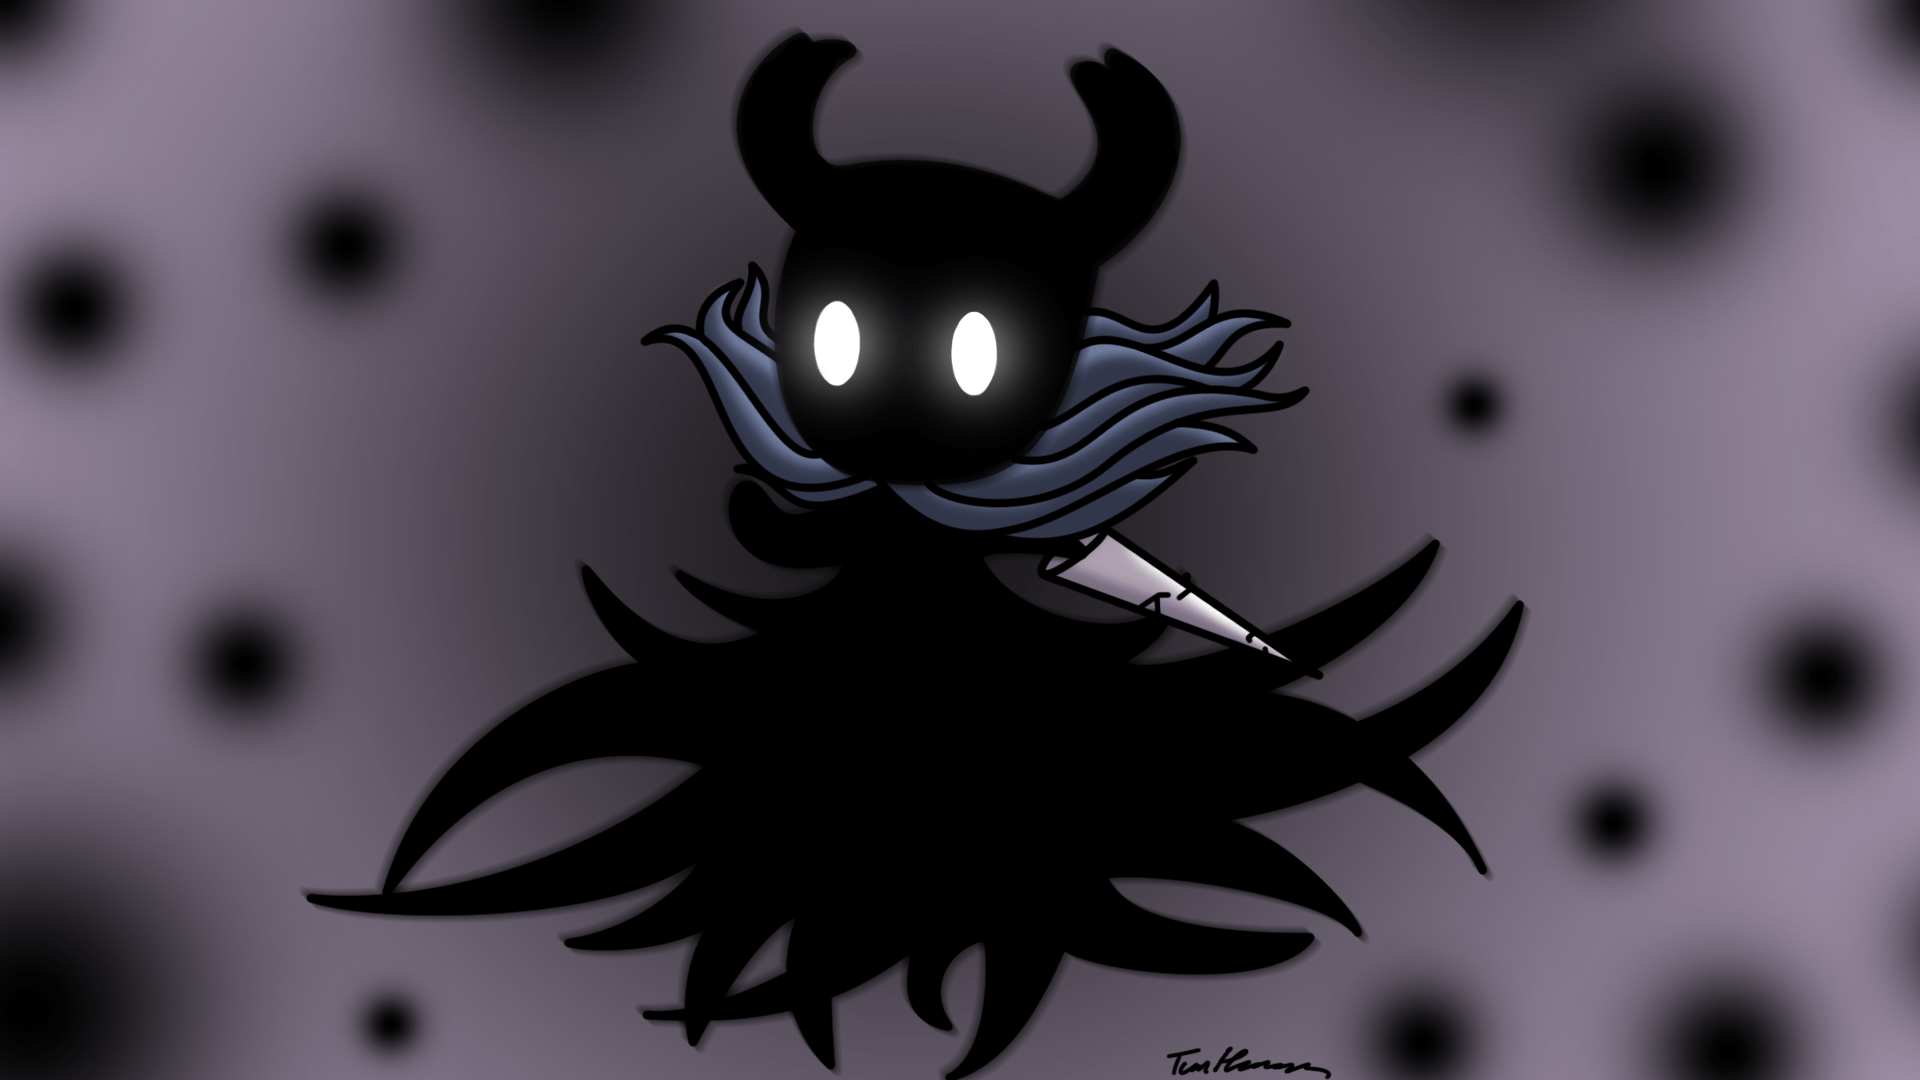 Hollow Knight Game Wallpaper. iCon Wallpaper HD